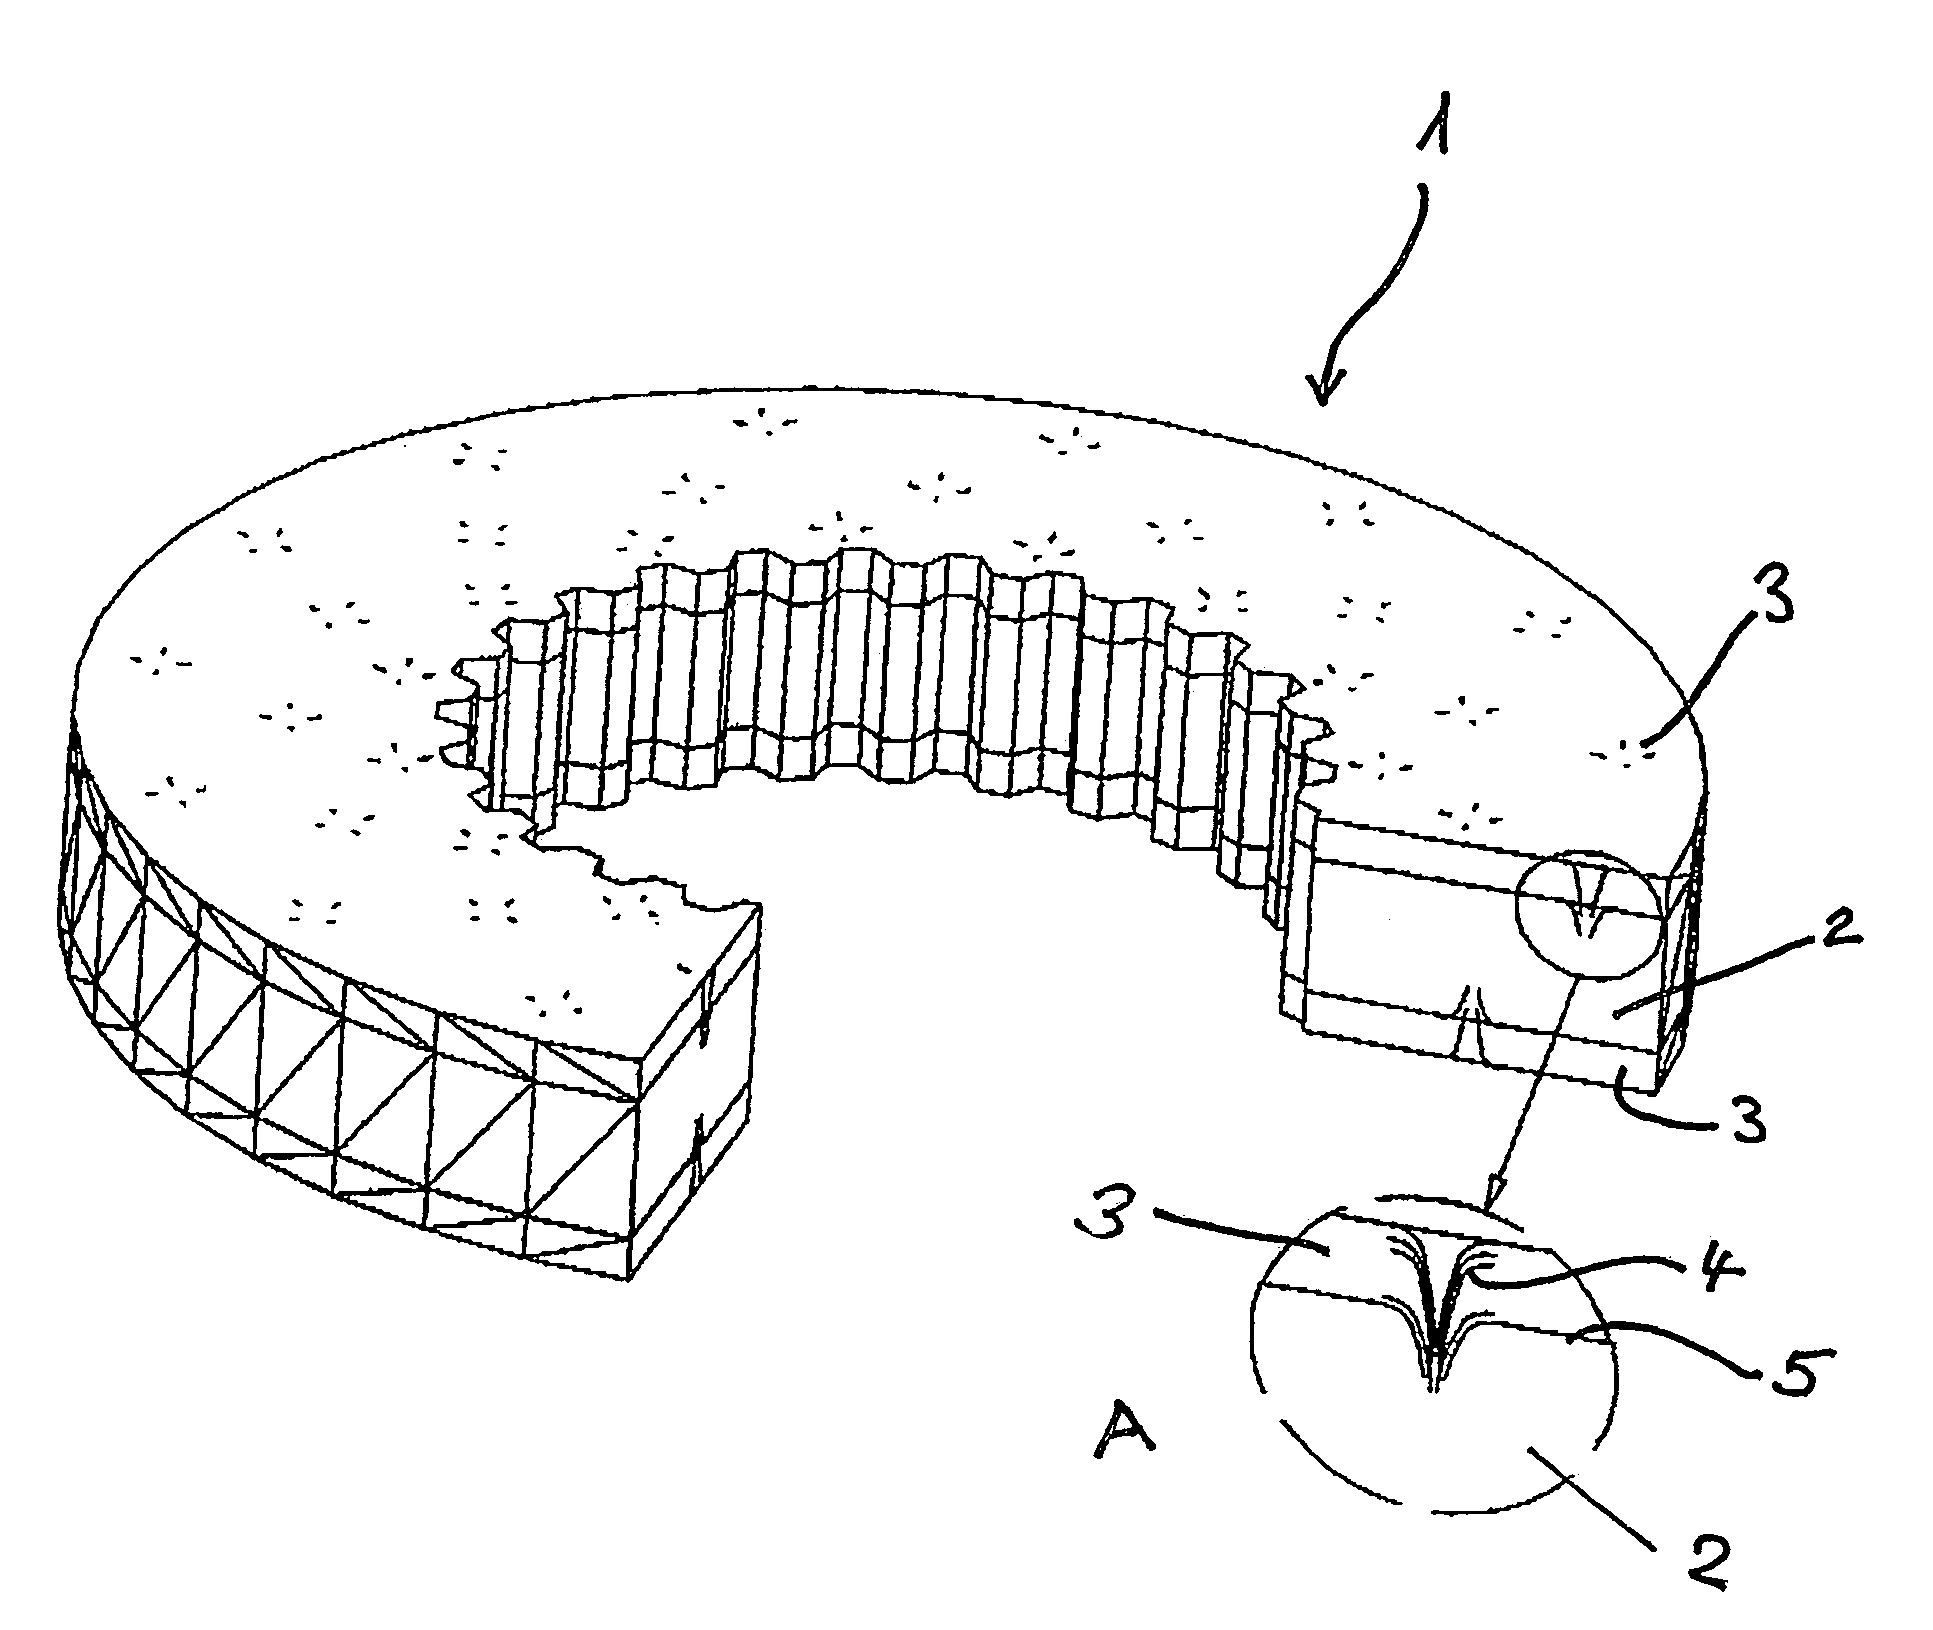 One-piece friction body with a support and a friction pad disposed thereon and method of its manufacture